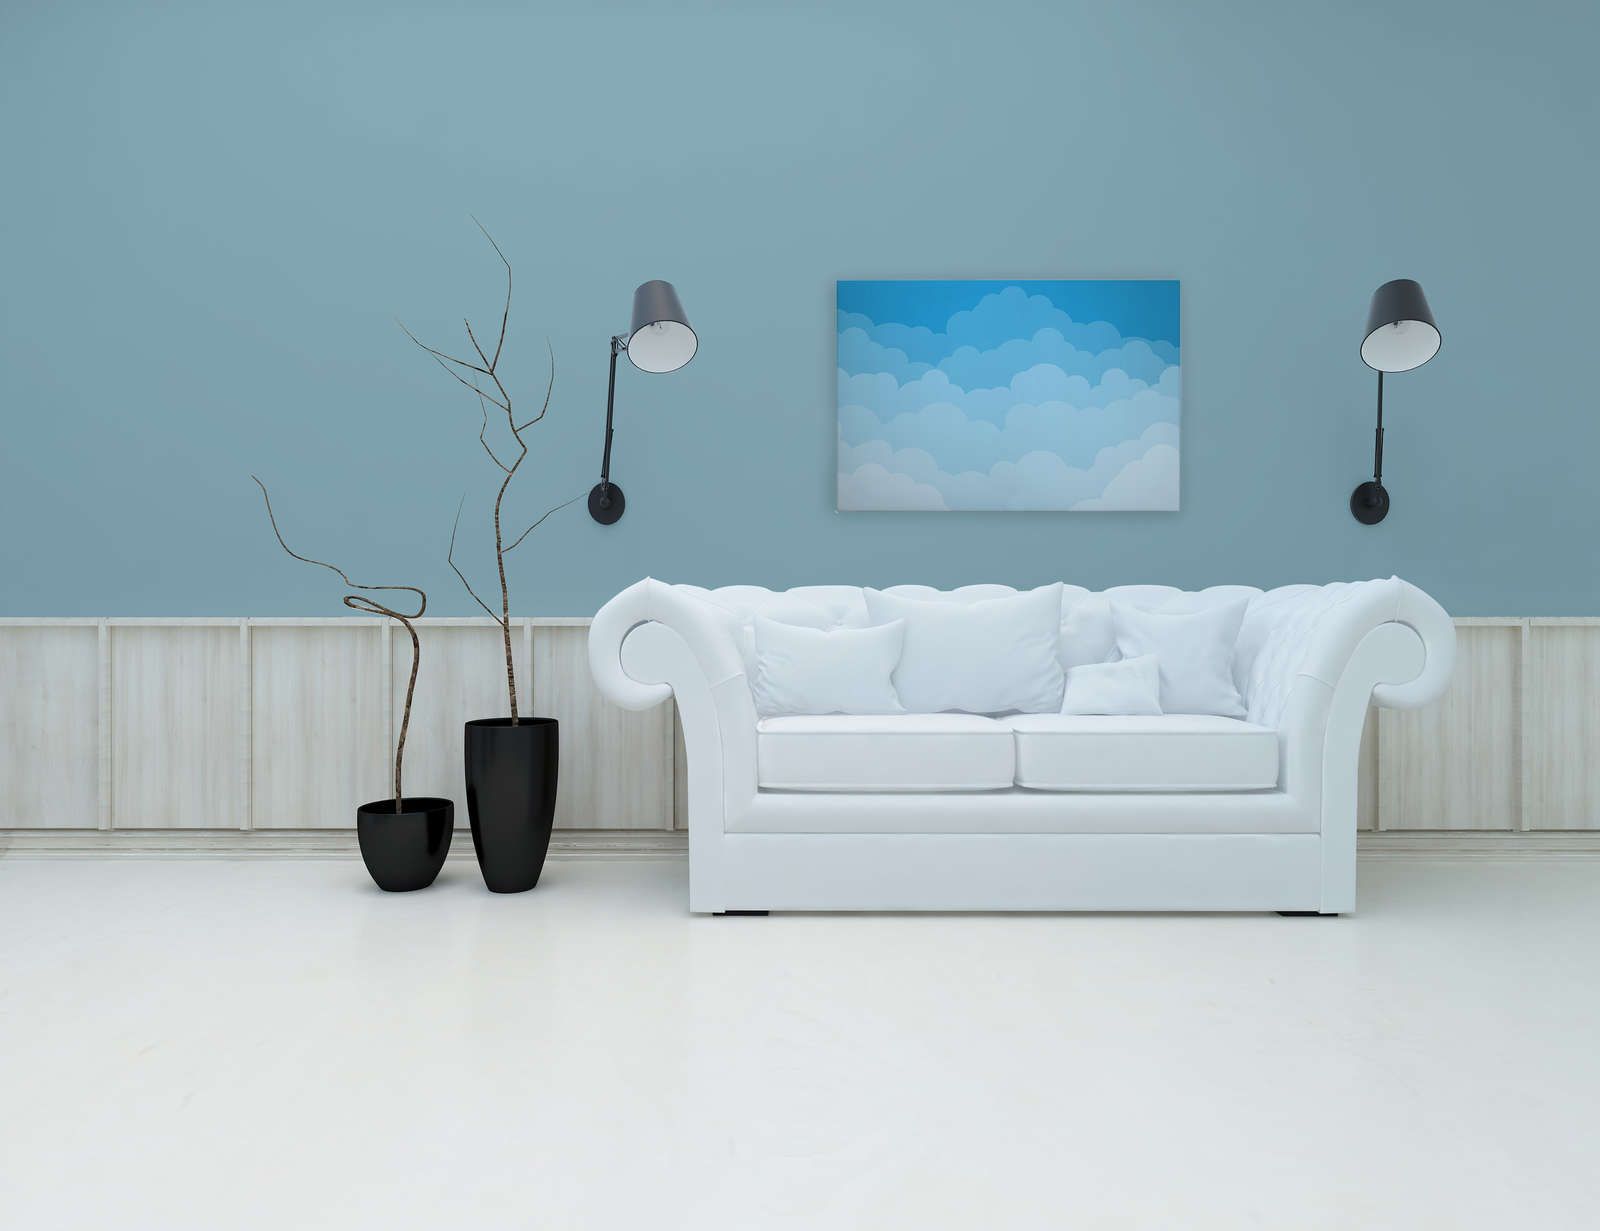             Canvas Sky with Clouds in Comic Style - 90 cm x 60 cm
        